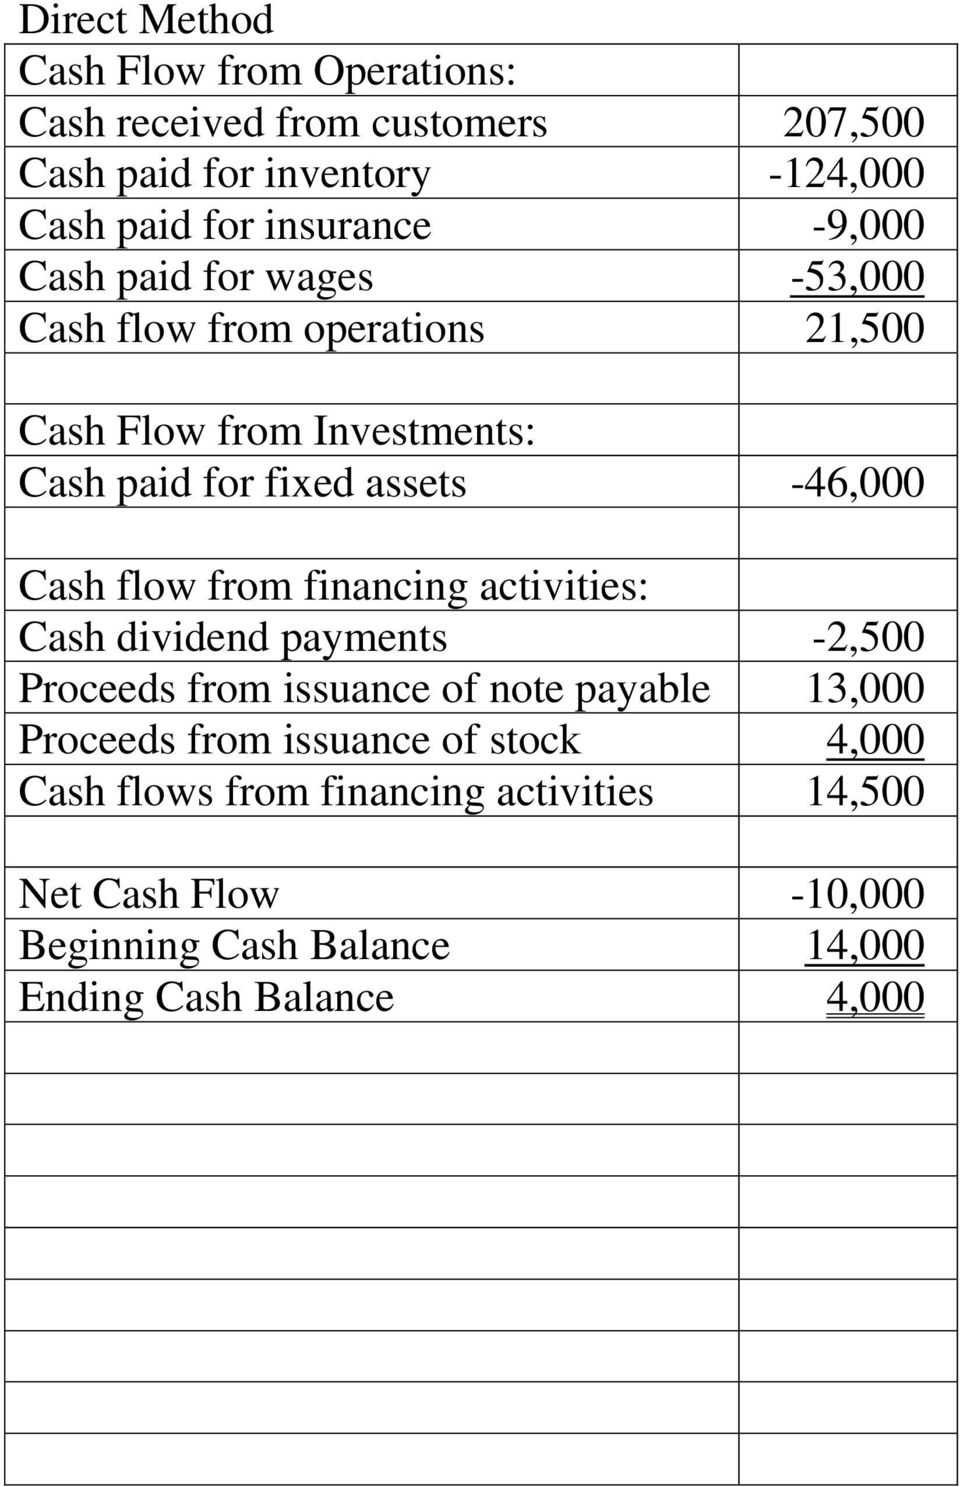 Cash flow from financing activities: Cash dividend payments -2,500 Proceeds from issuance of note payable 13,000 Proceeds from